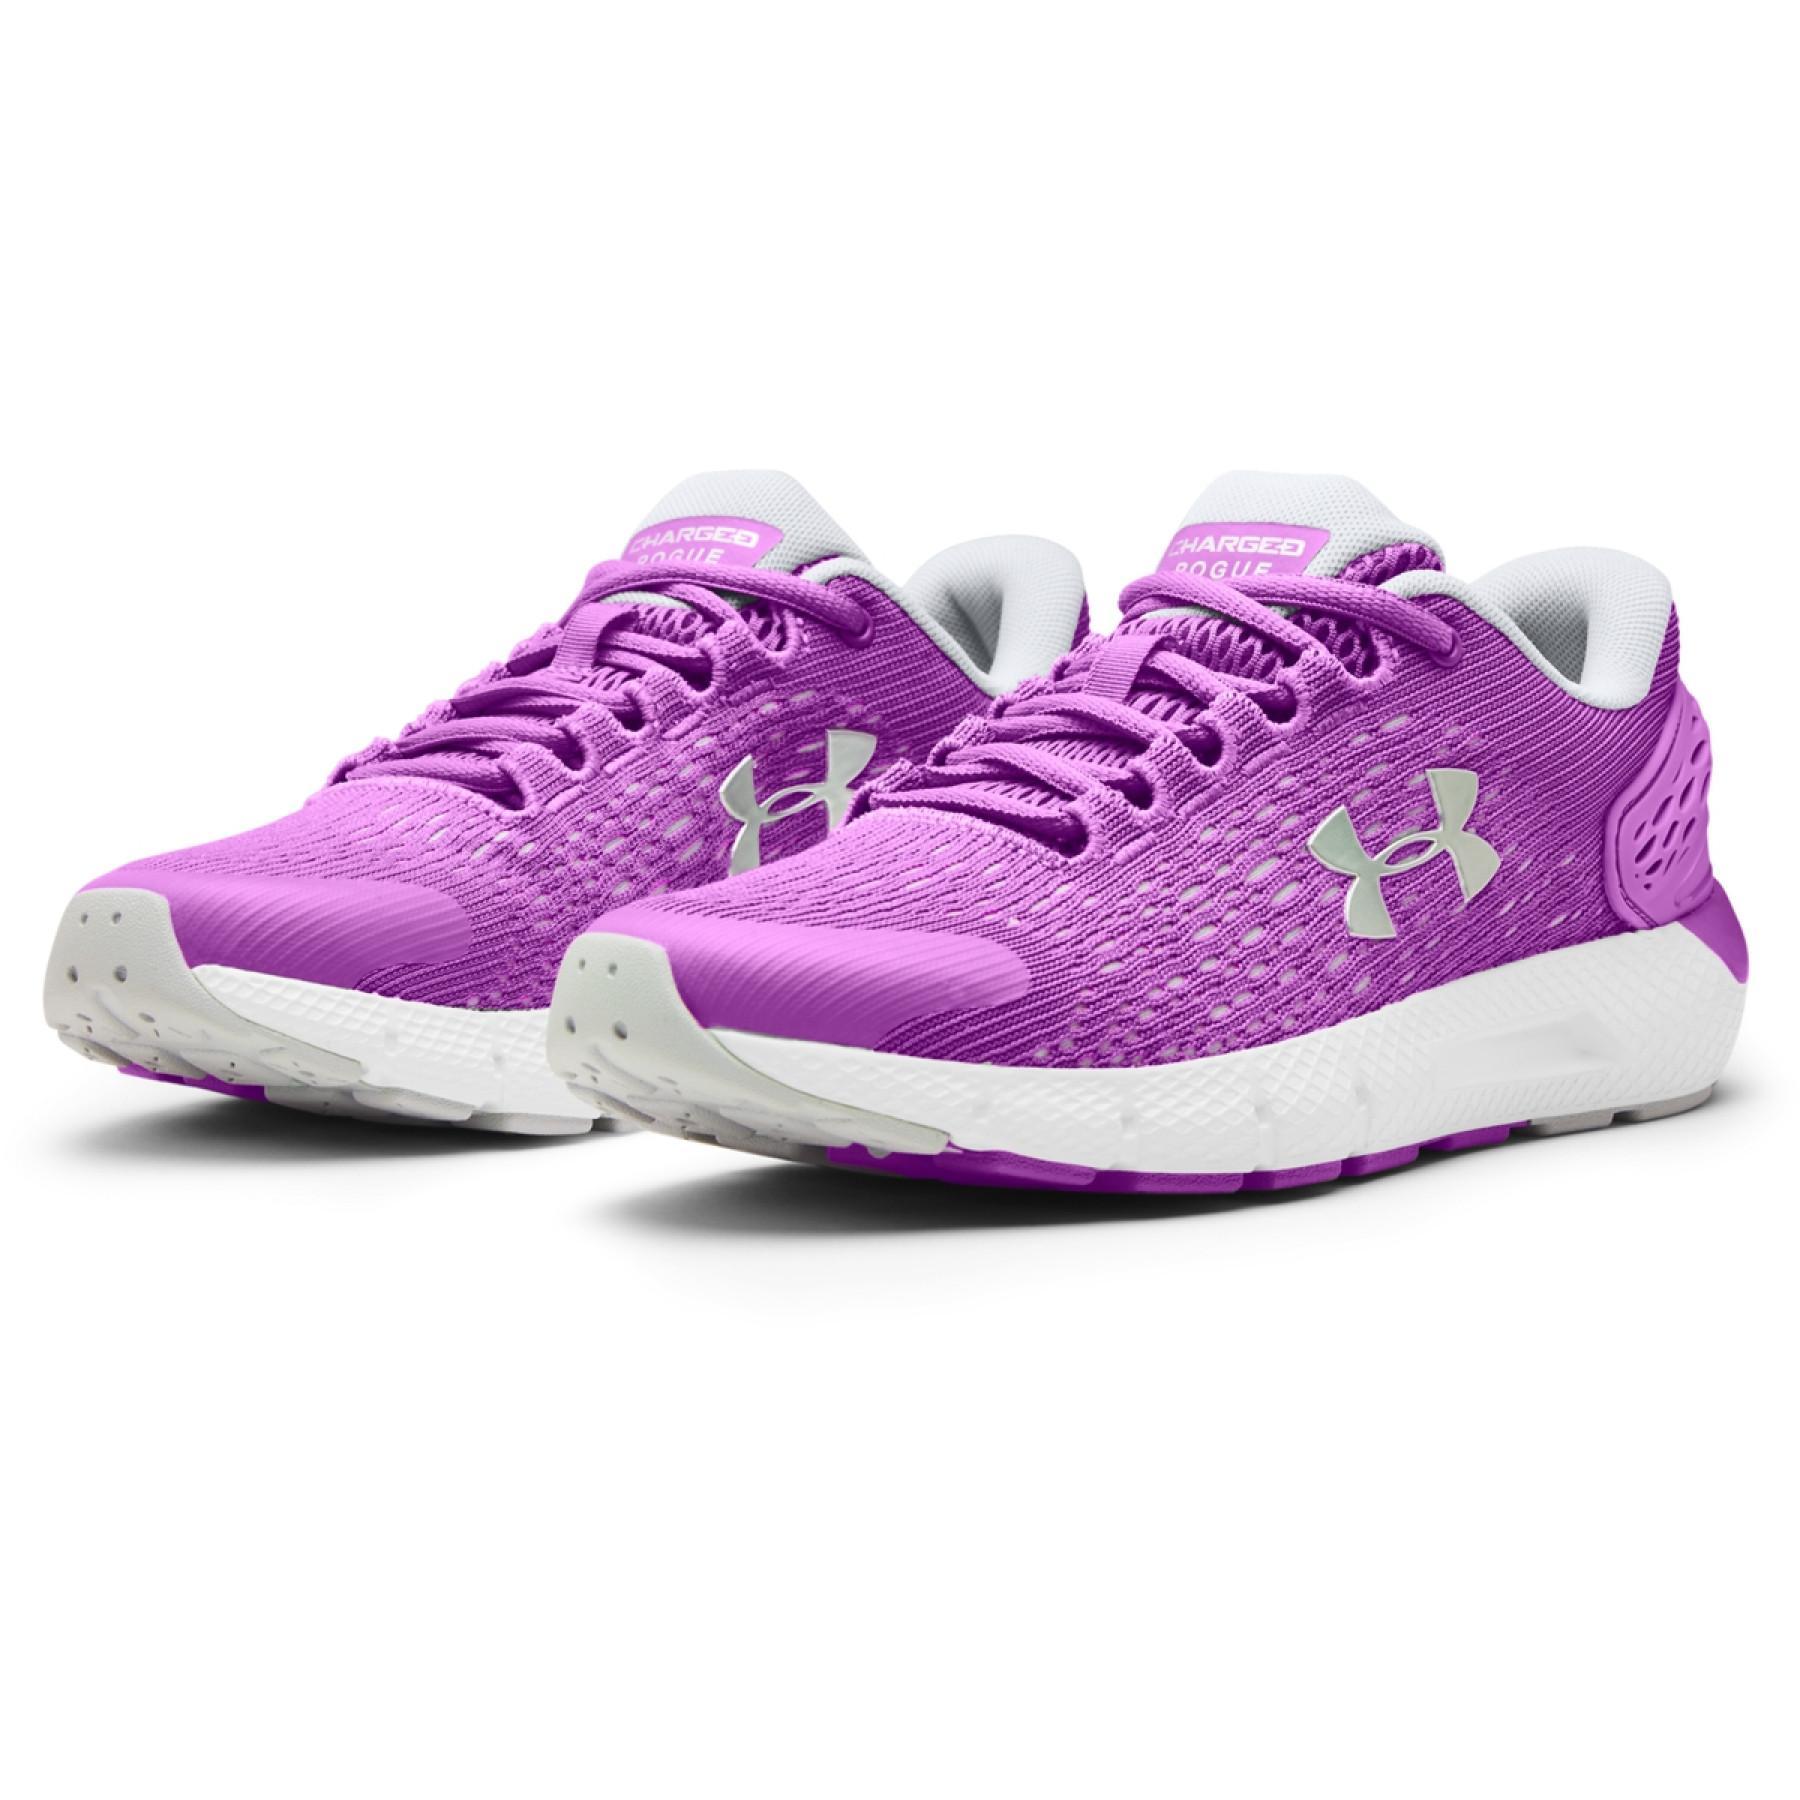 Children's running shoes Under Armour Grade School Charged Rogue 2